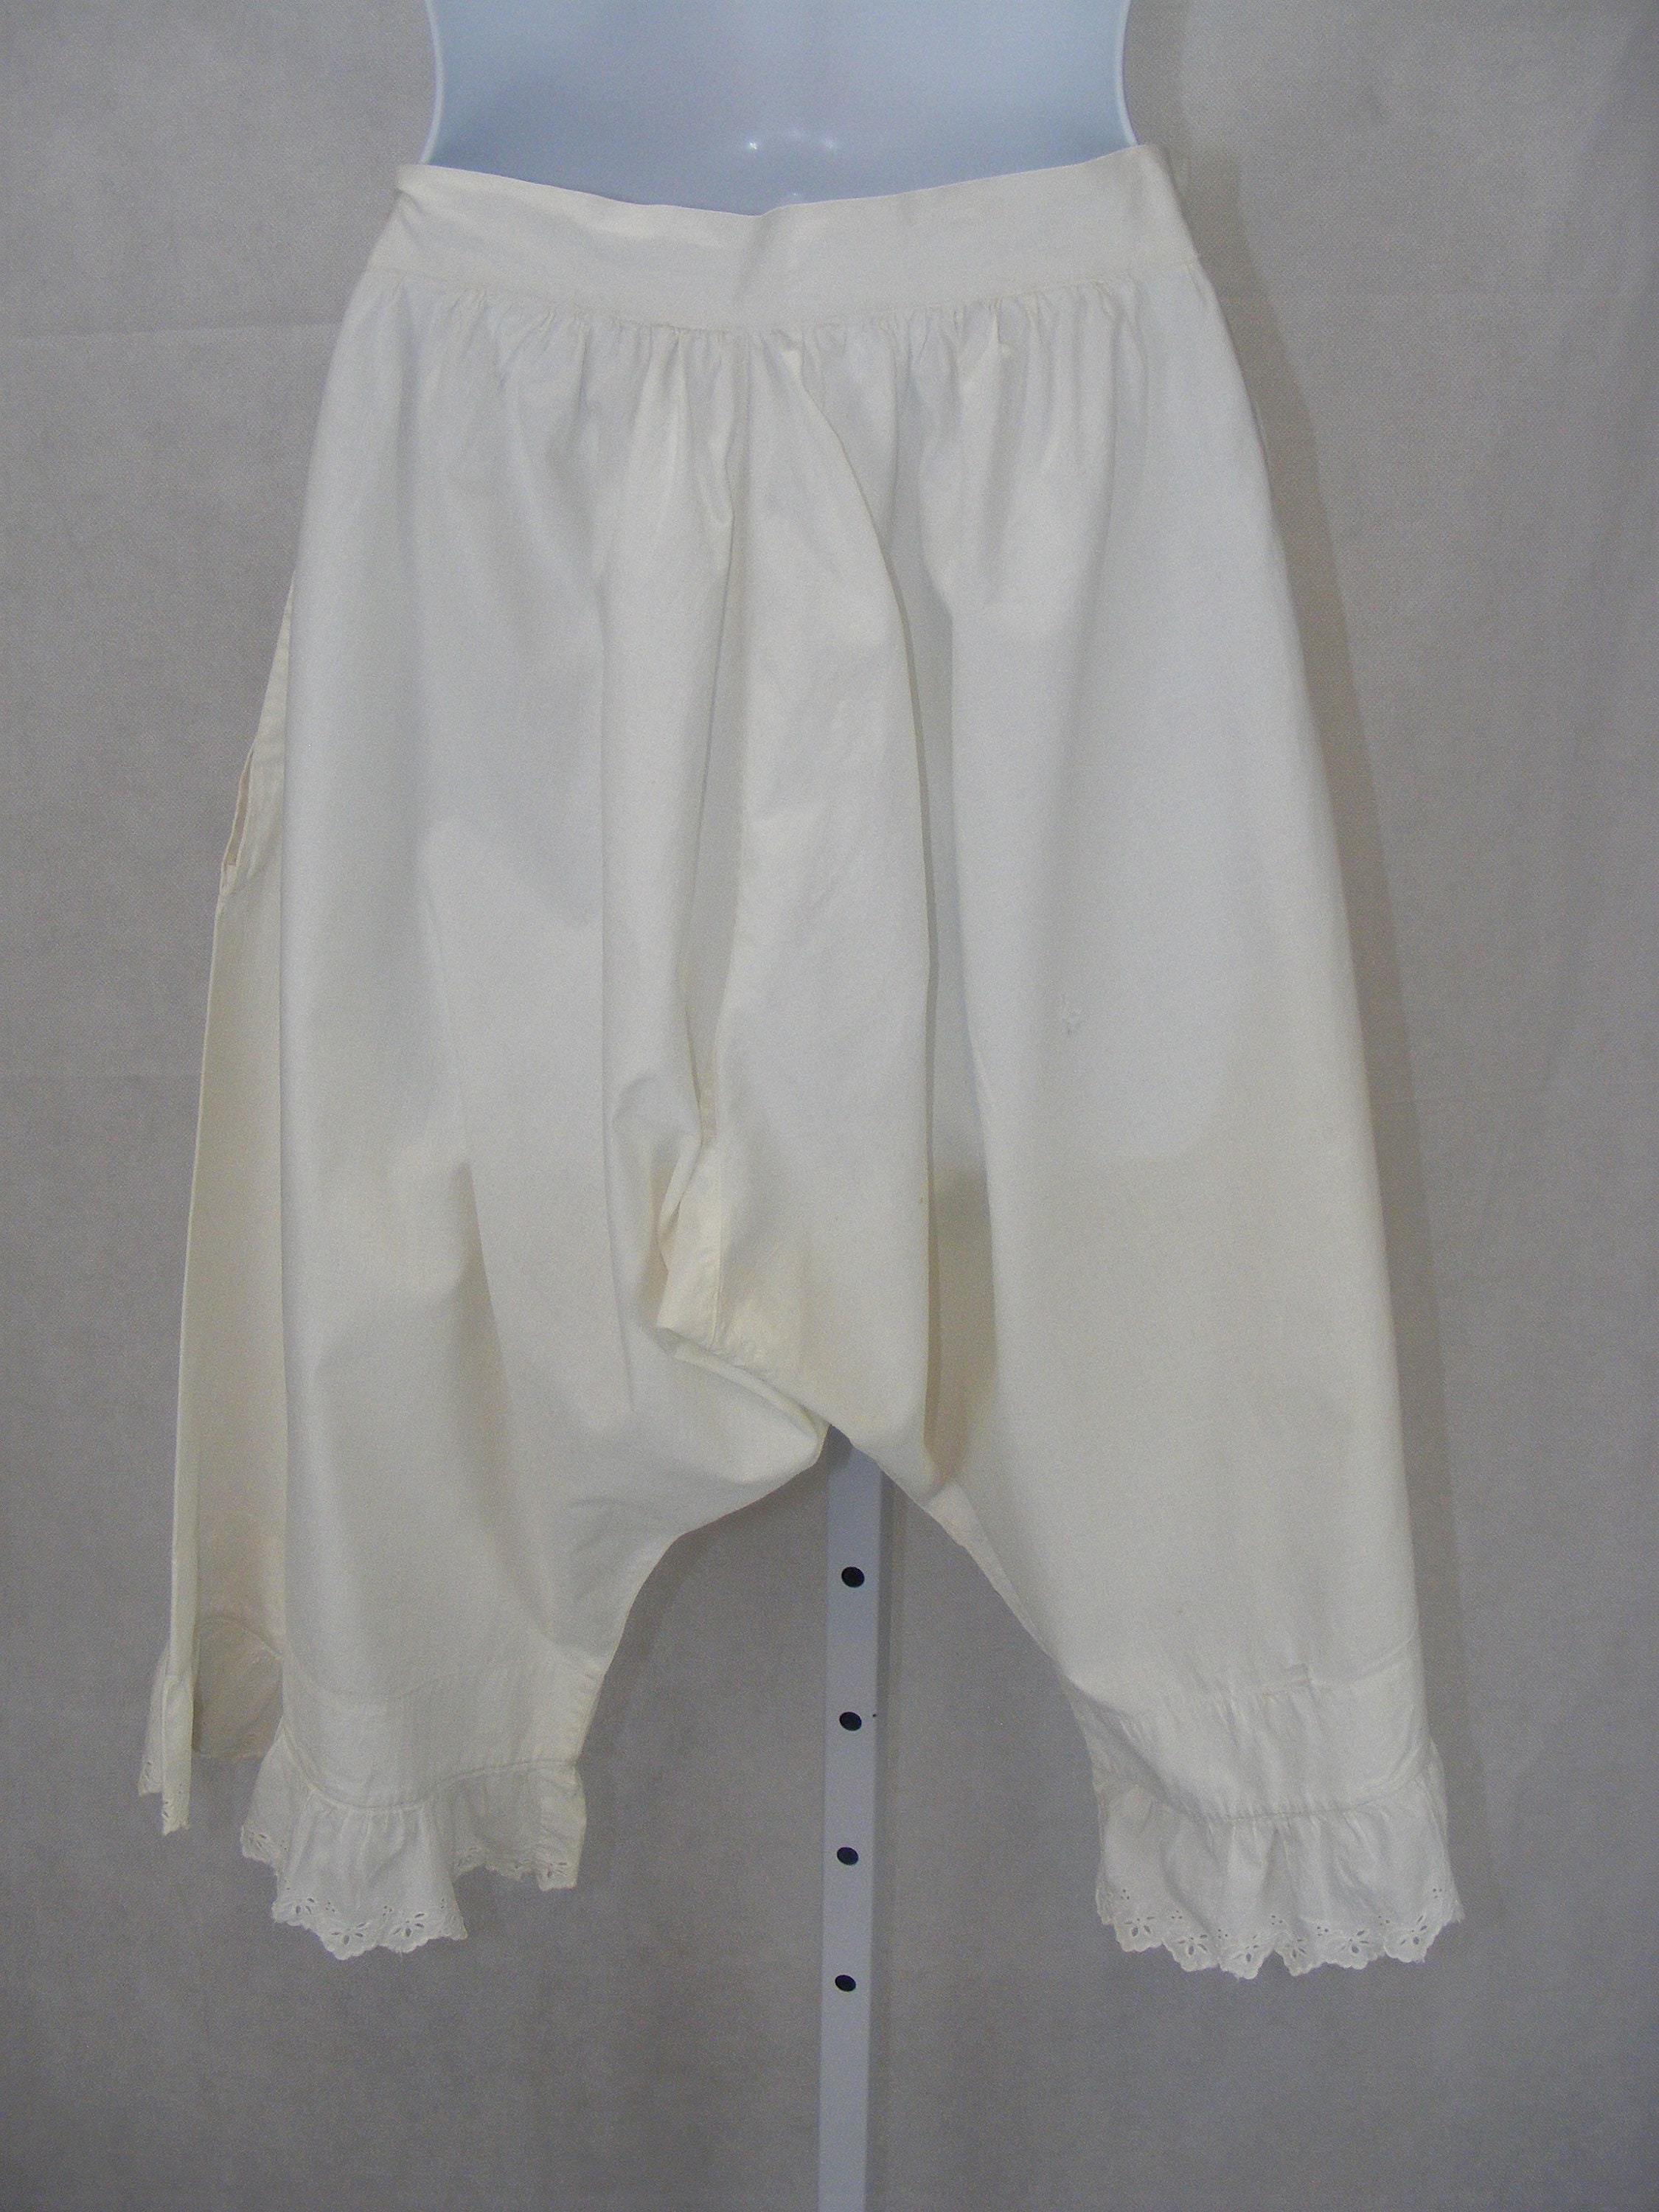 Victorian 1890s Pantaloons Step-Ins Vintage Bloomers White | Etsy